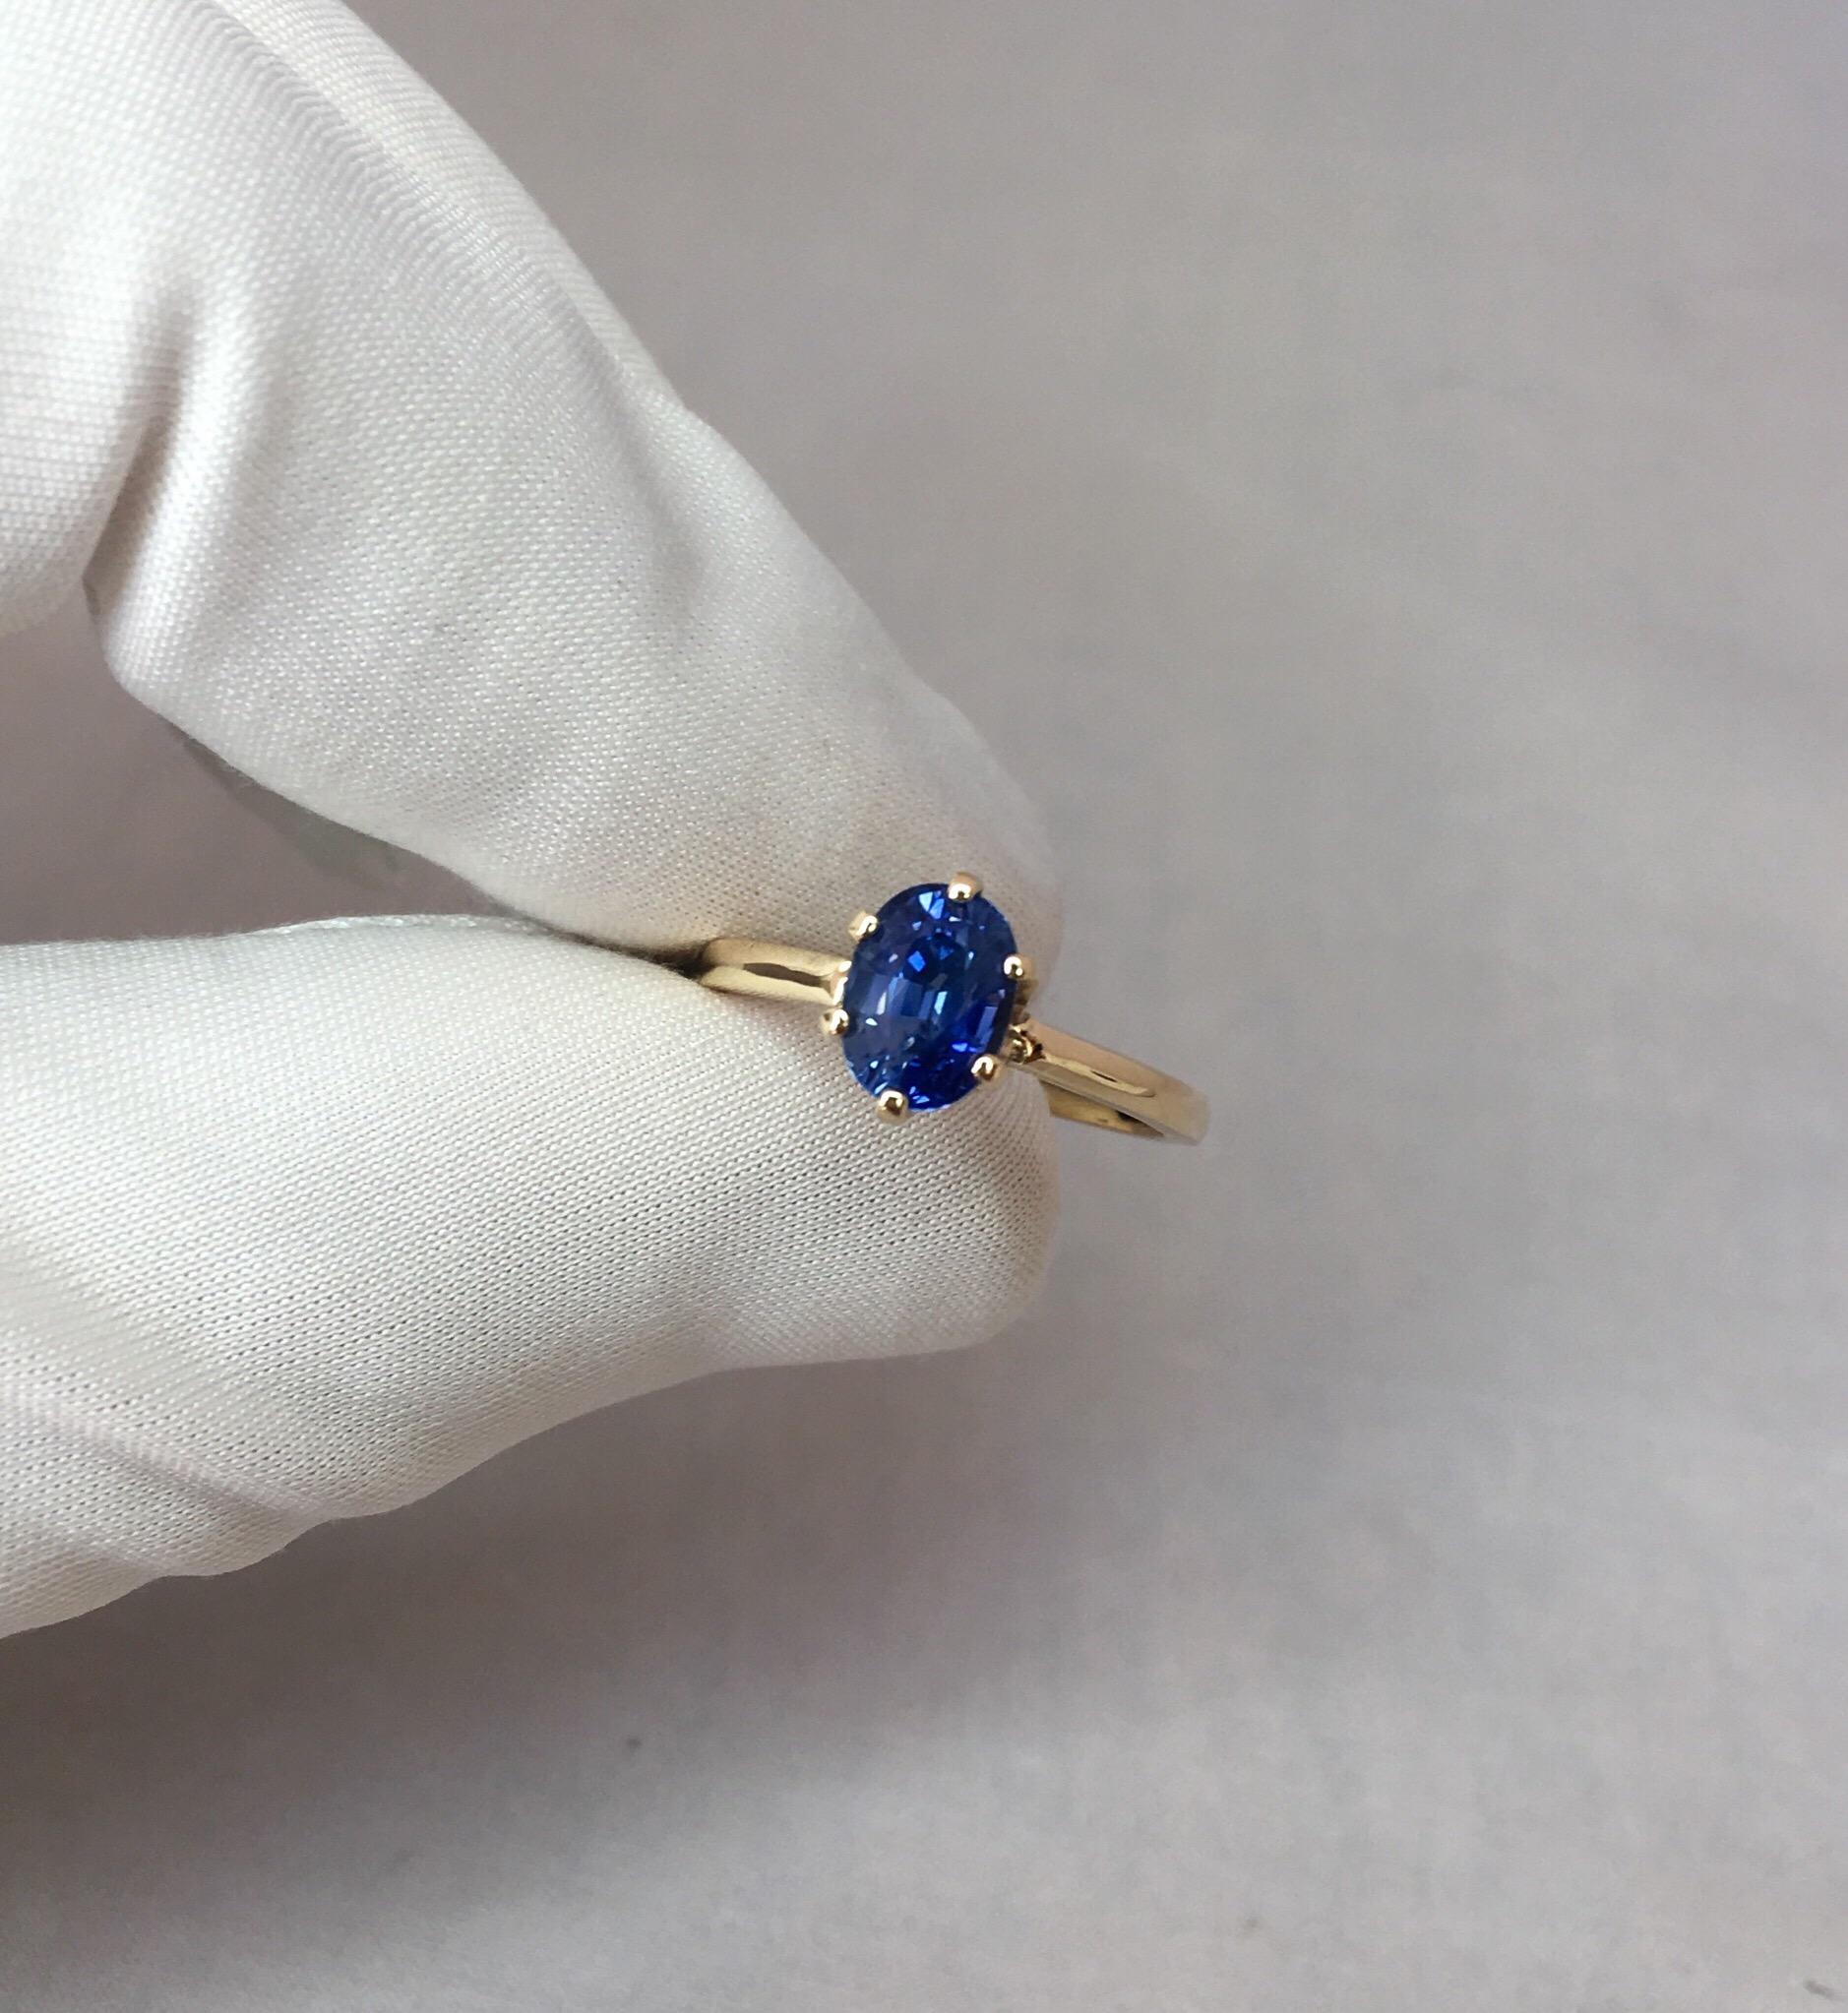 Stunning natural blue ceylon sapphire set in a beautiful 14k yellow gold 6 prong solitaire ring. 

1.75 carat stone with a stunning cornflower blue colour and very good clarity. Only some light coloiur zoning in the stone (typical of Ceylon